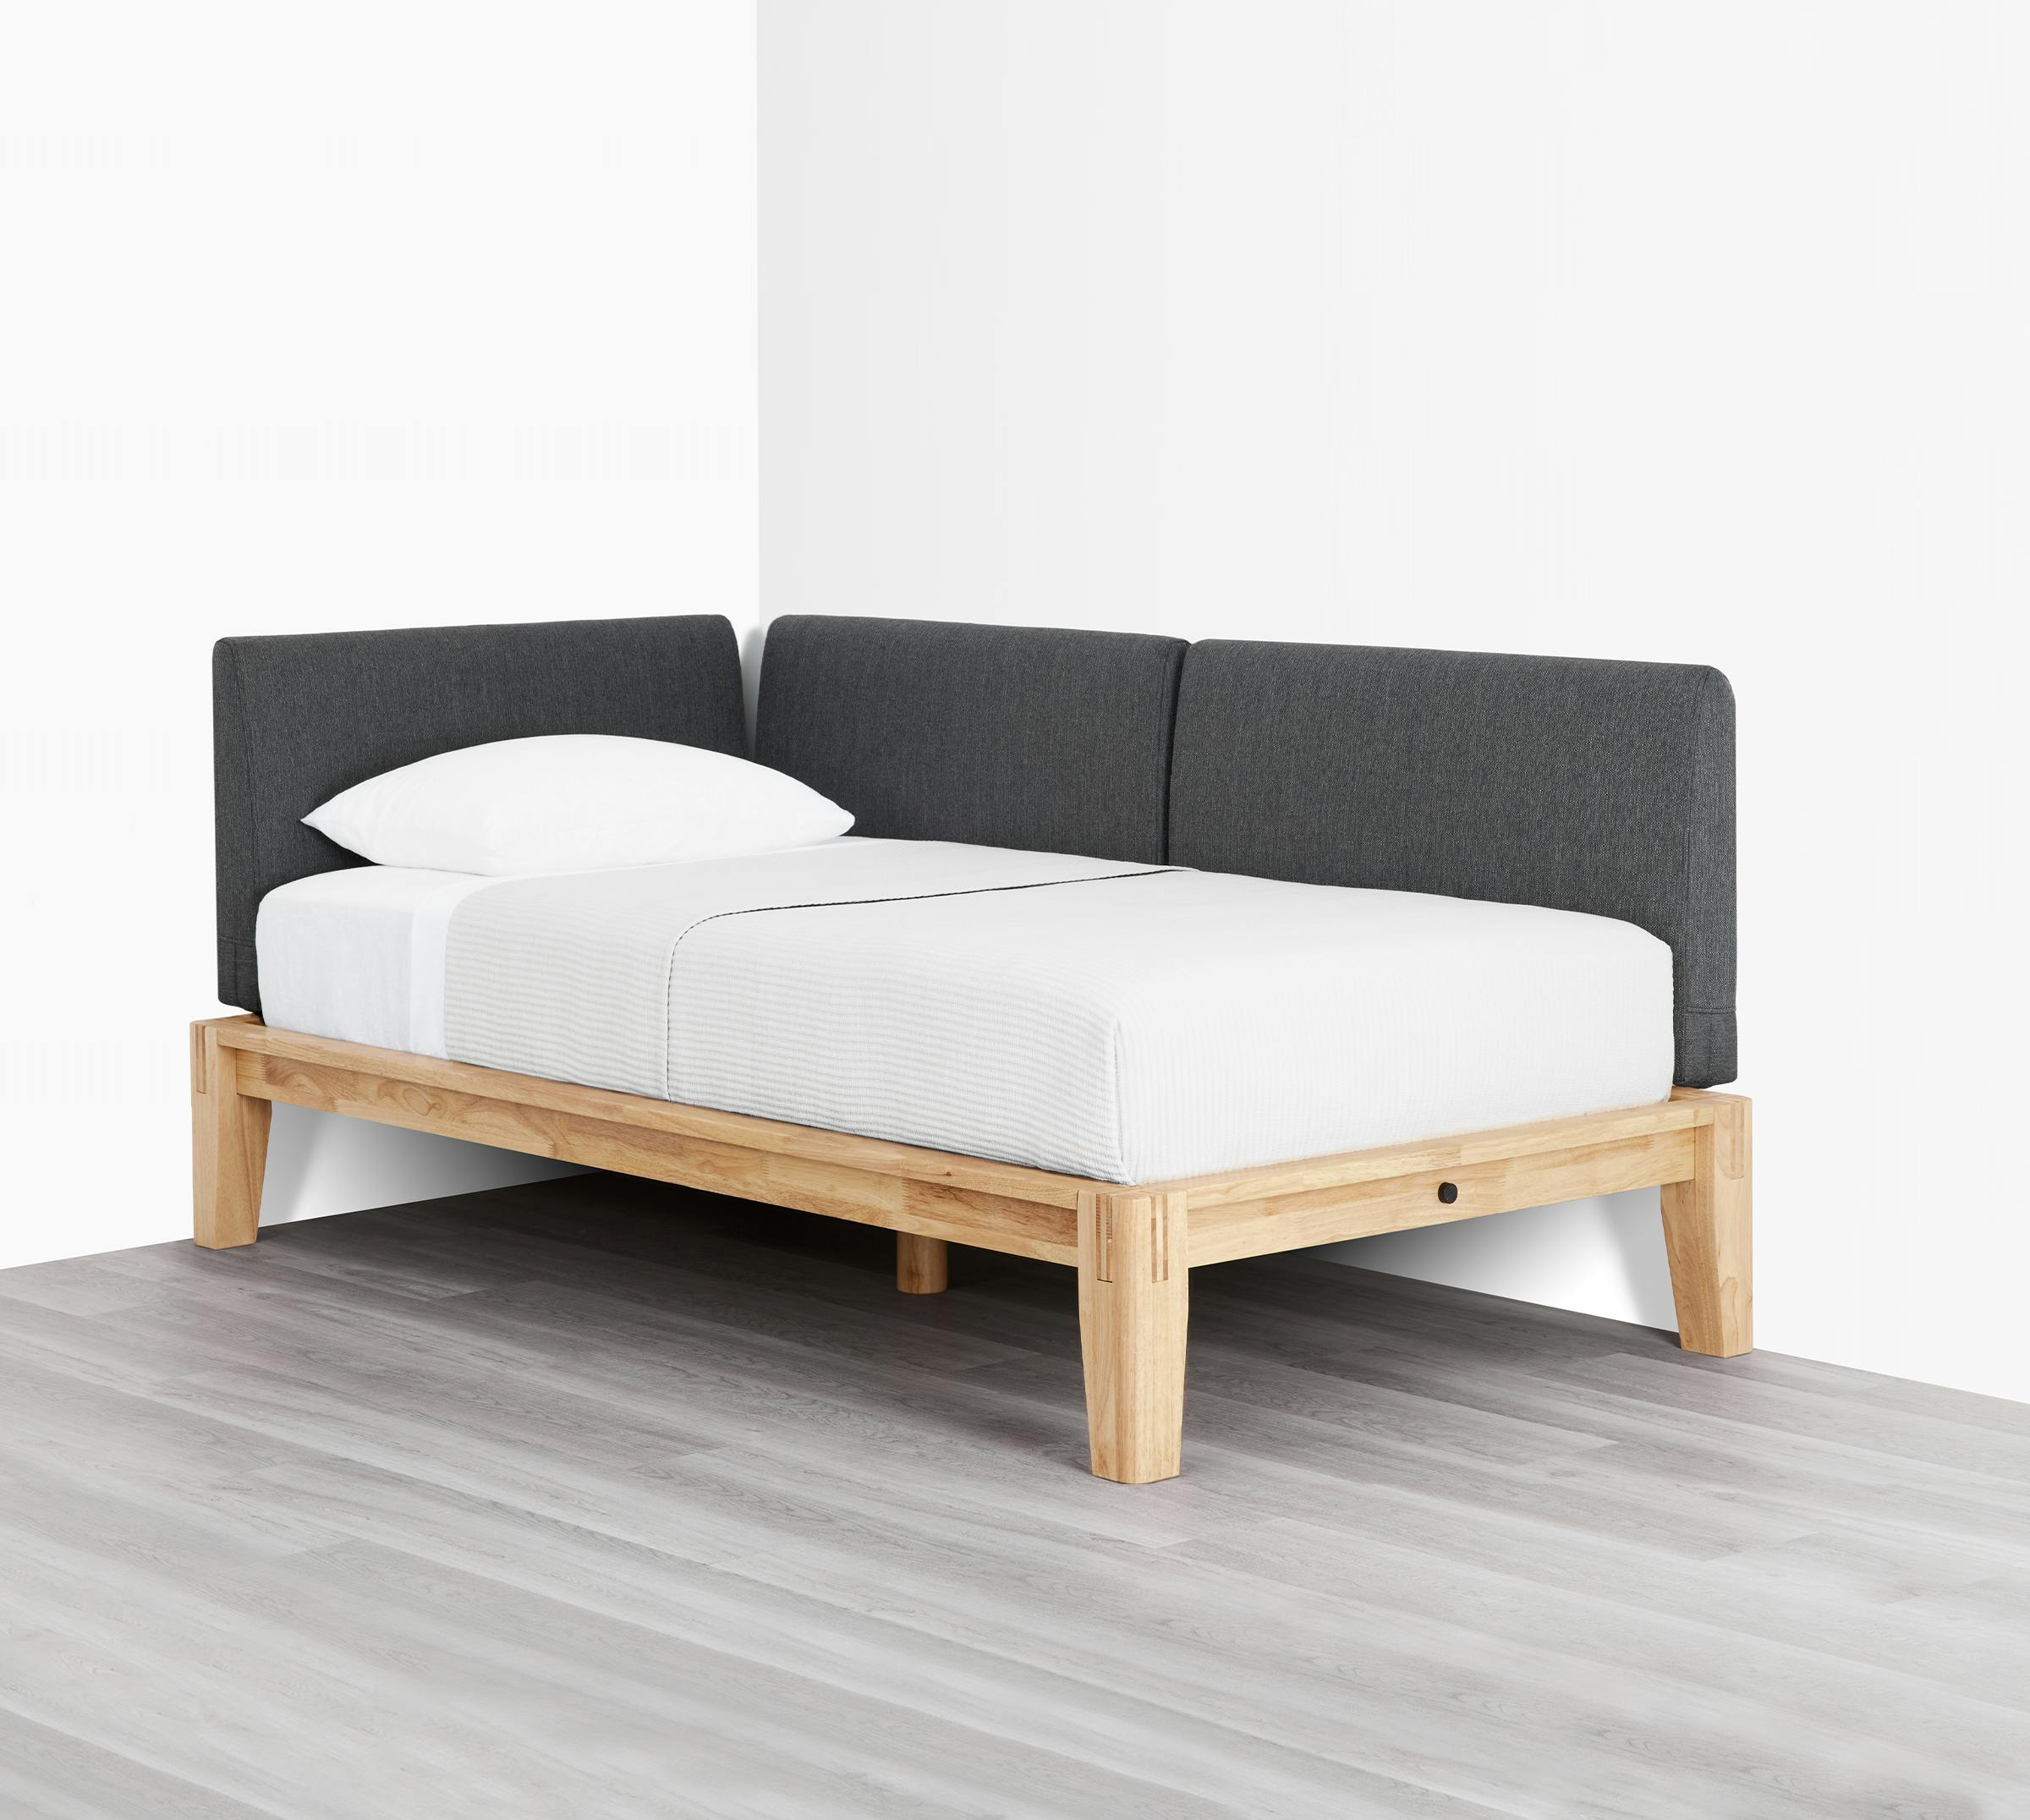 The Bed (Daybed / Natural / Dark Charcoal) - Diagonal